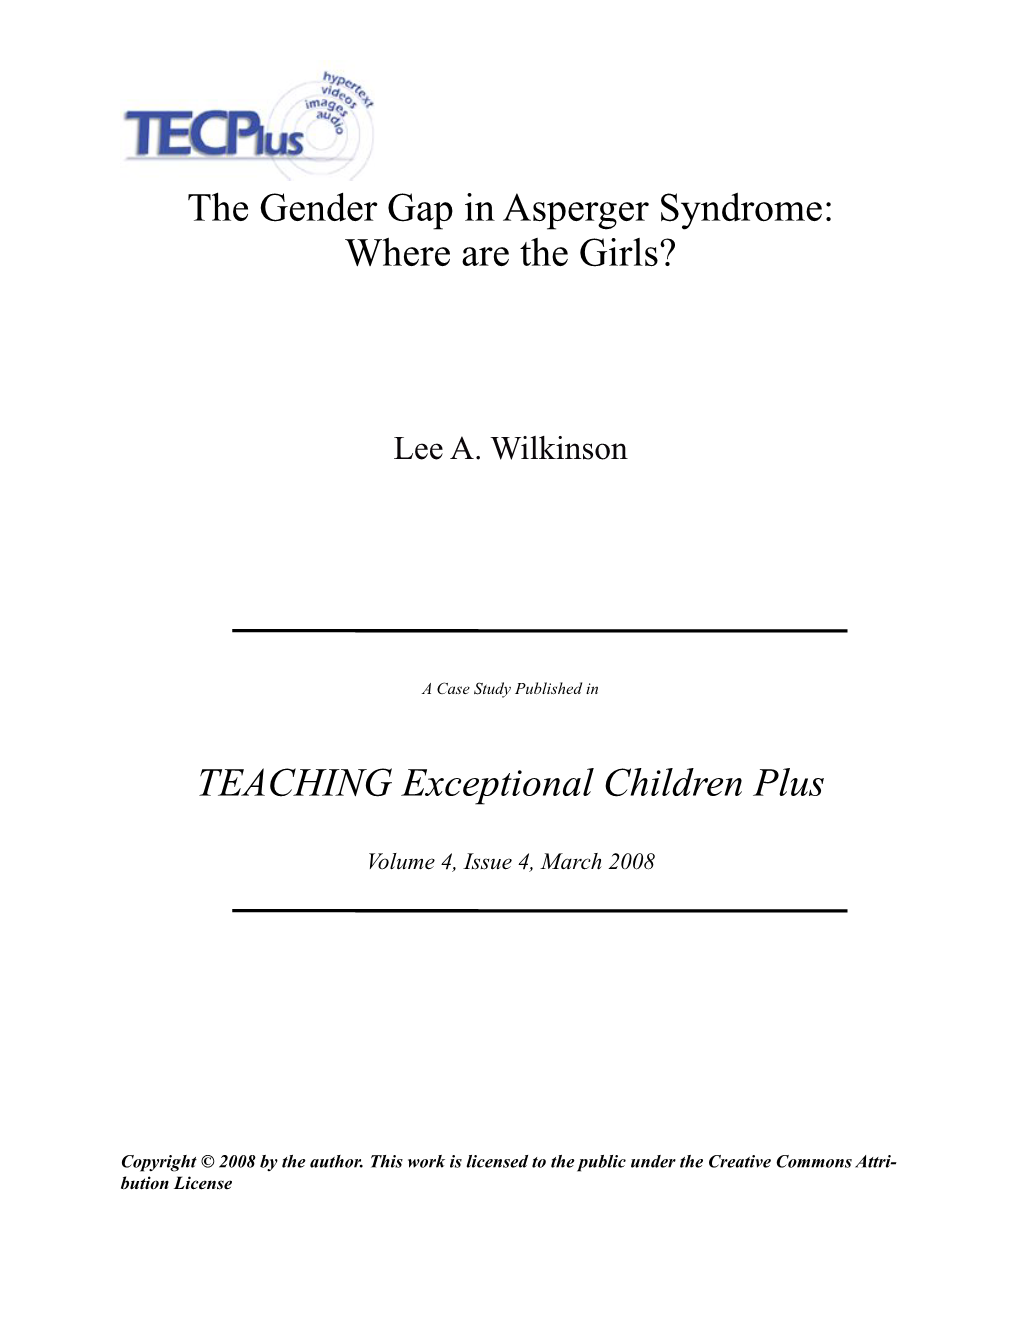 The Gender Gap in Asperger Syndrome: Where Are the Girls?